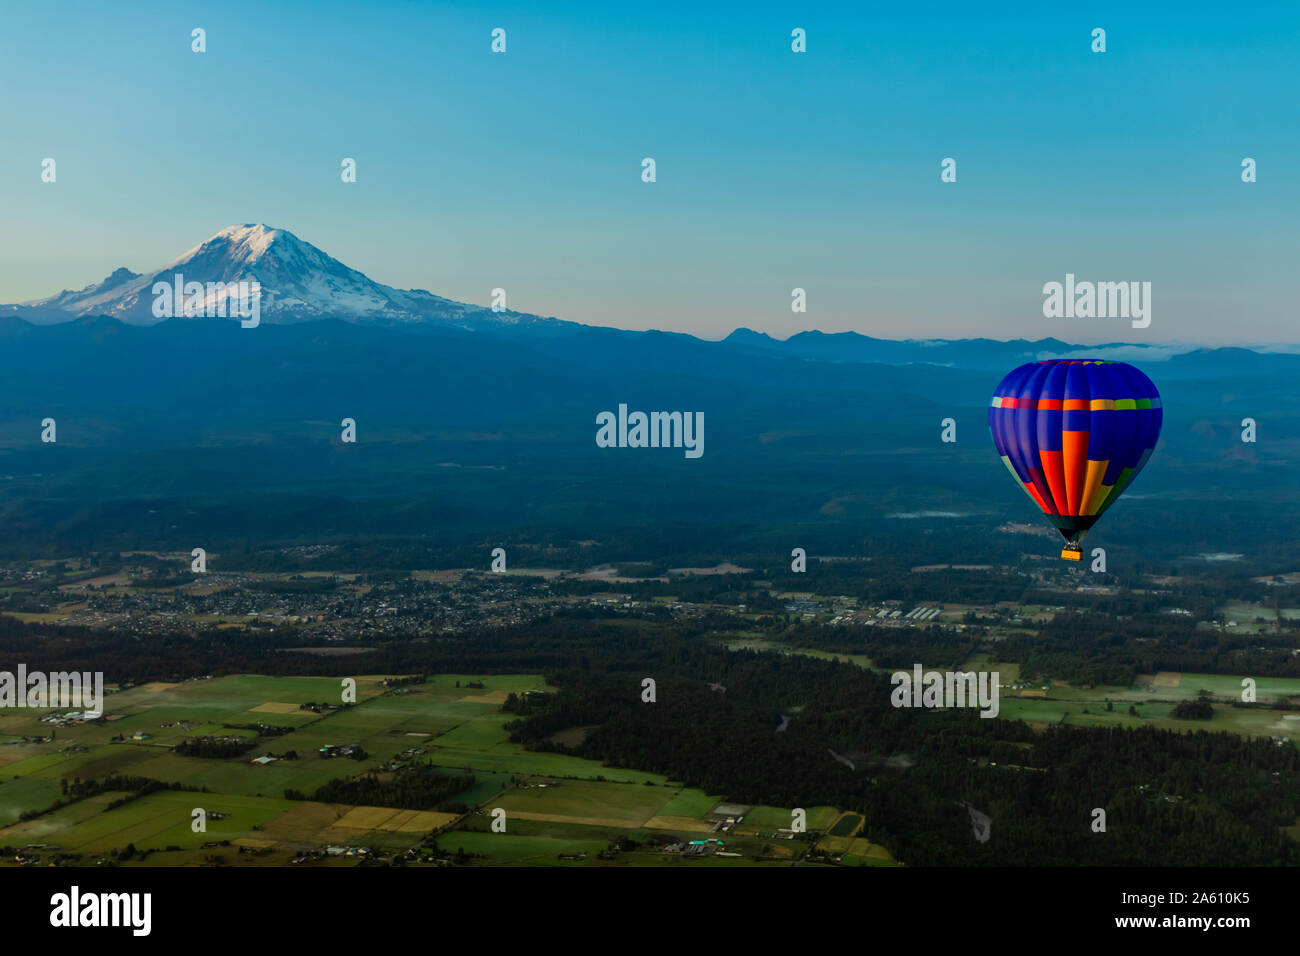 Aerial view of hot air balloon floating over farmland and Mount Rainier in the distance, Washington State, United States of America, North America Stock Photo